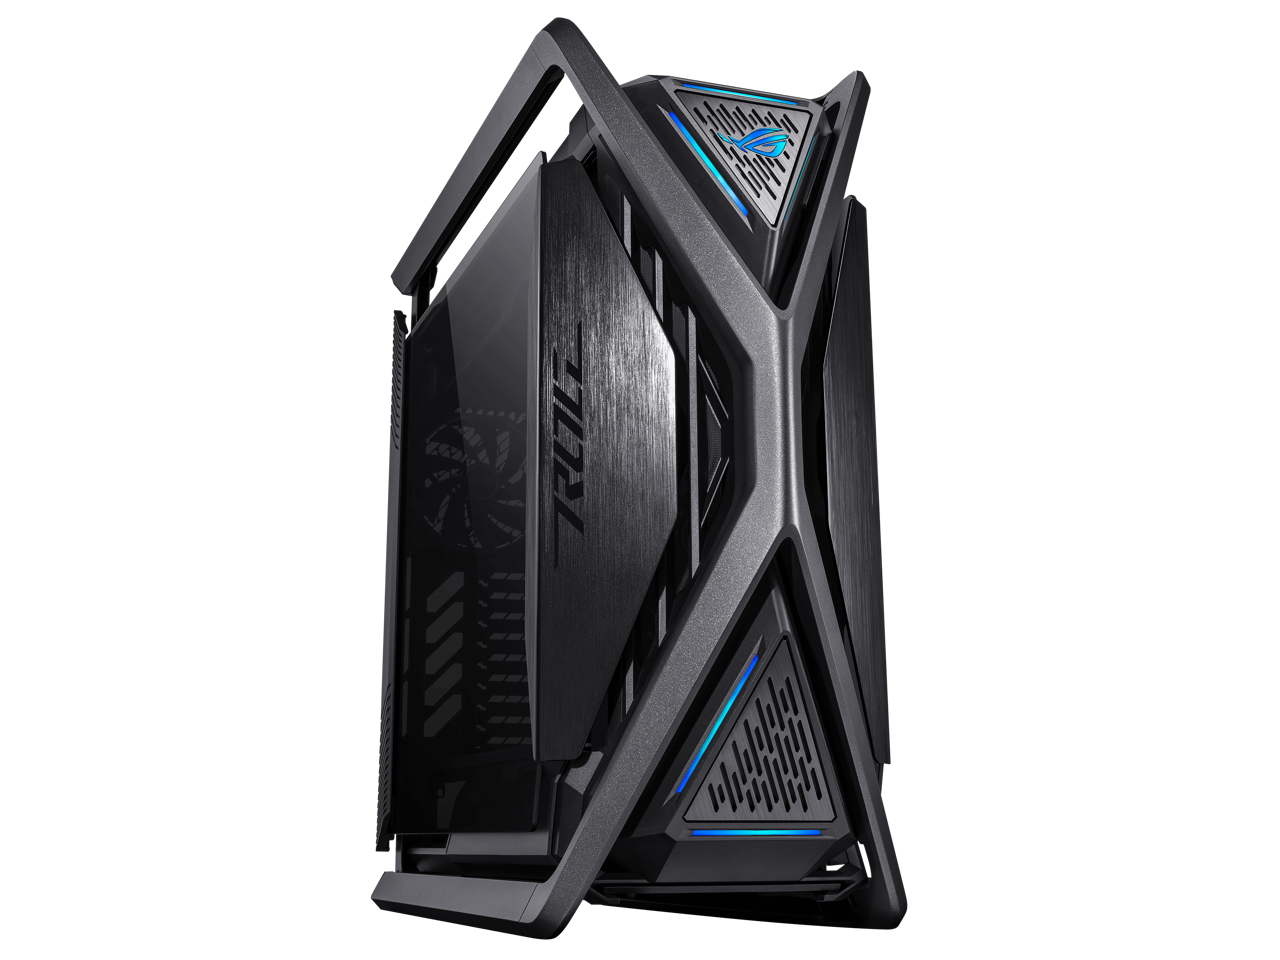 ASUS ROG Hyperion GR701 EATX full-tower computer case with semi-open structure, tool-free side panels, supports up to 2 x 420mm radiators, built-in graphics card holder,2x front panel Type-C